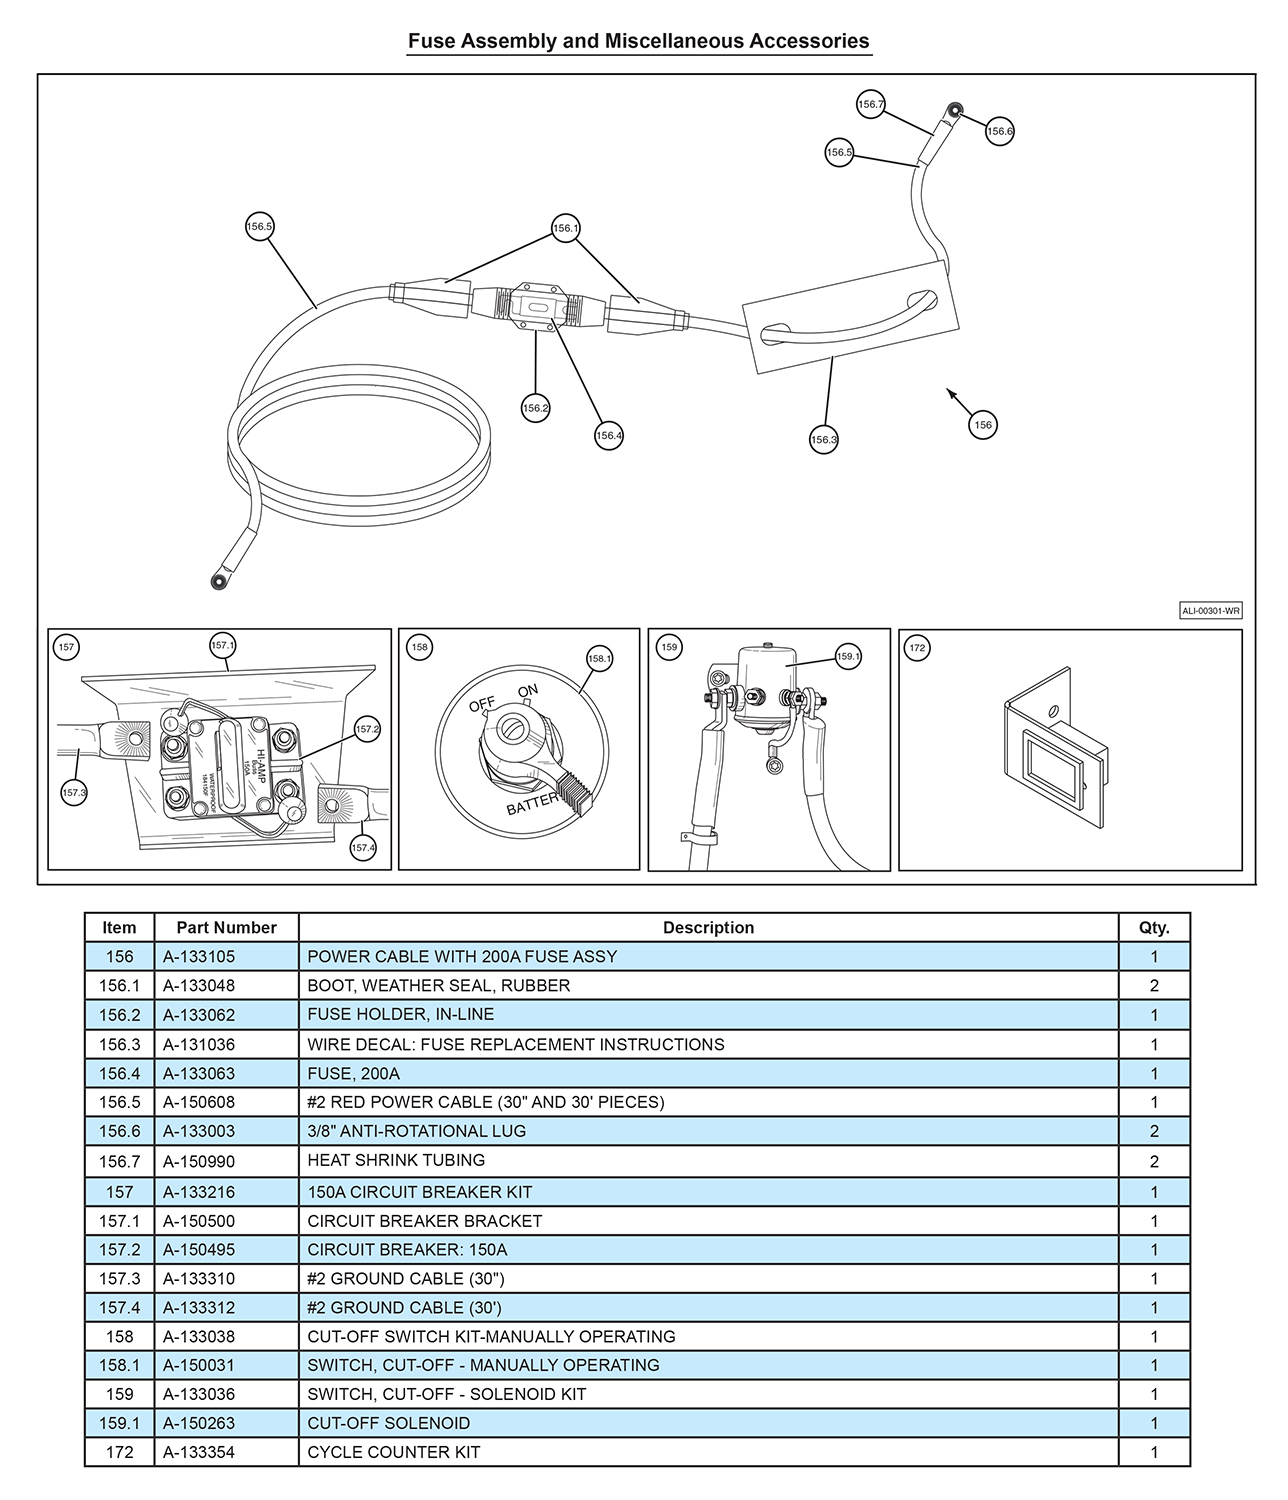 Anthony MTU-GLR-WR Fuse Assembly And Miscellaneous Accessories Diagram